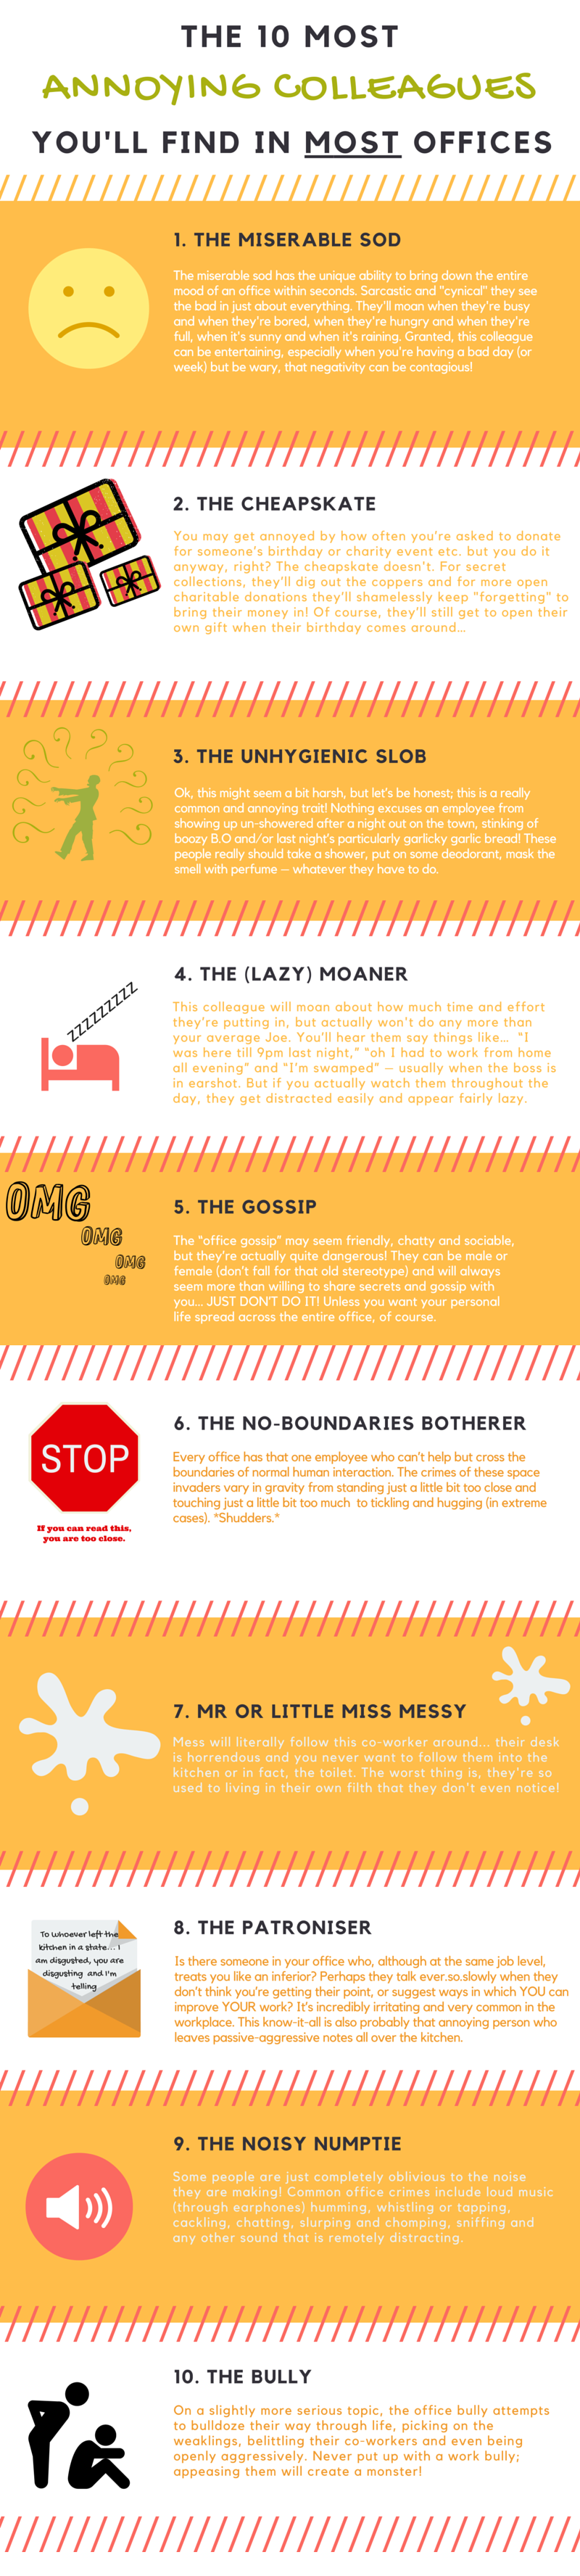 annoying colleagues infographic